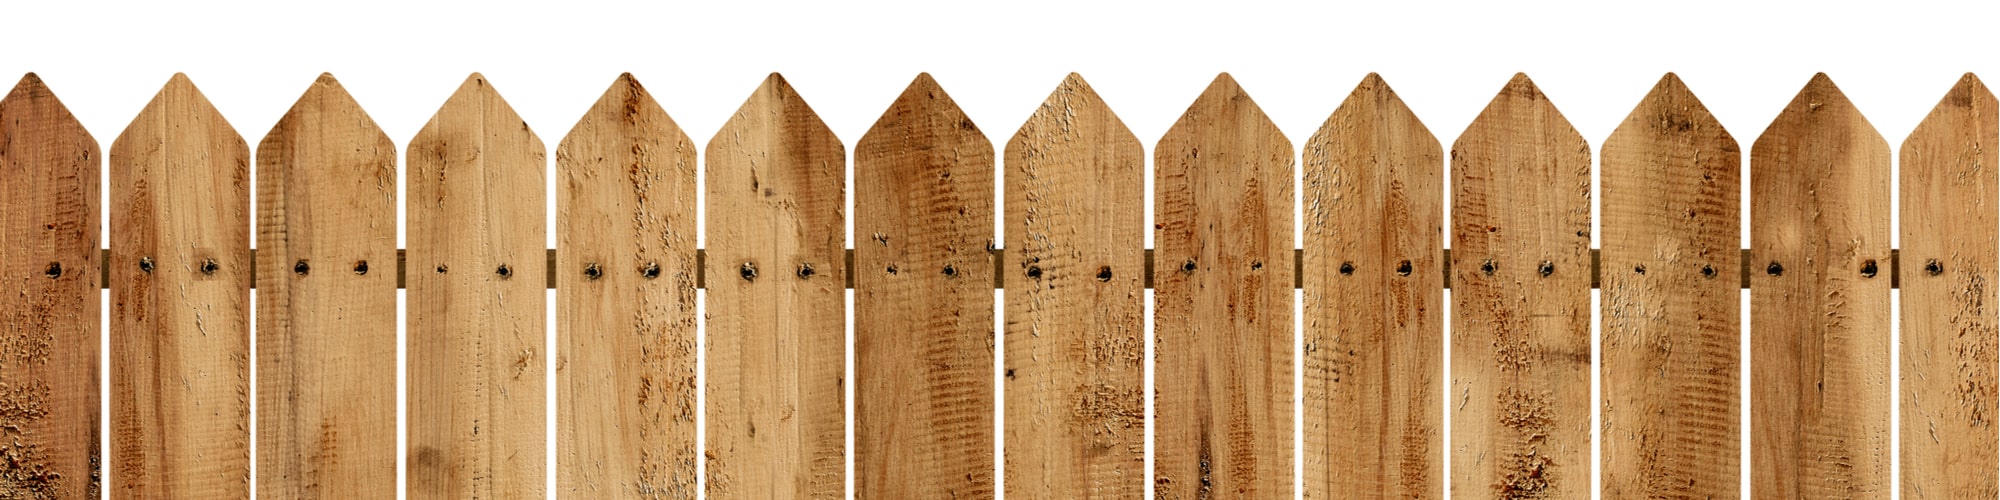 Wooden fence posts